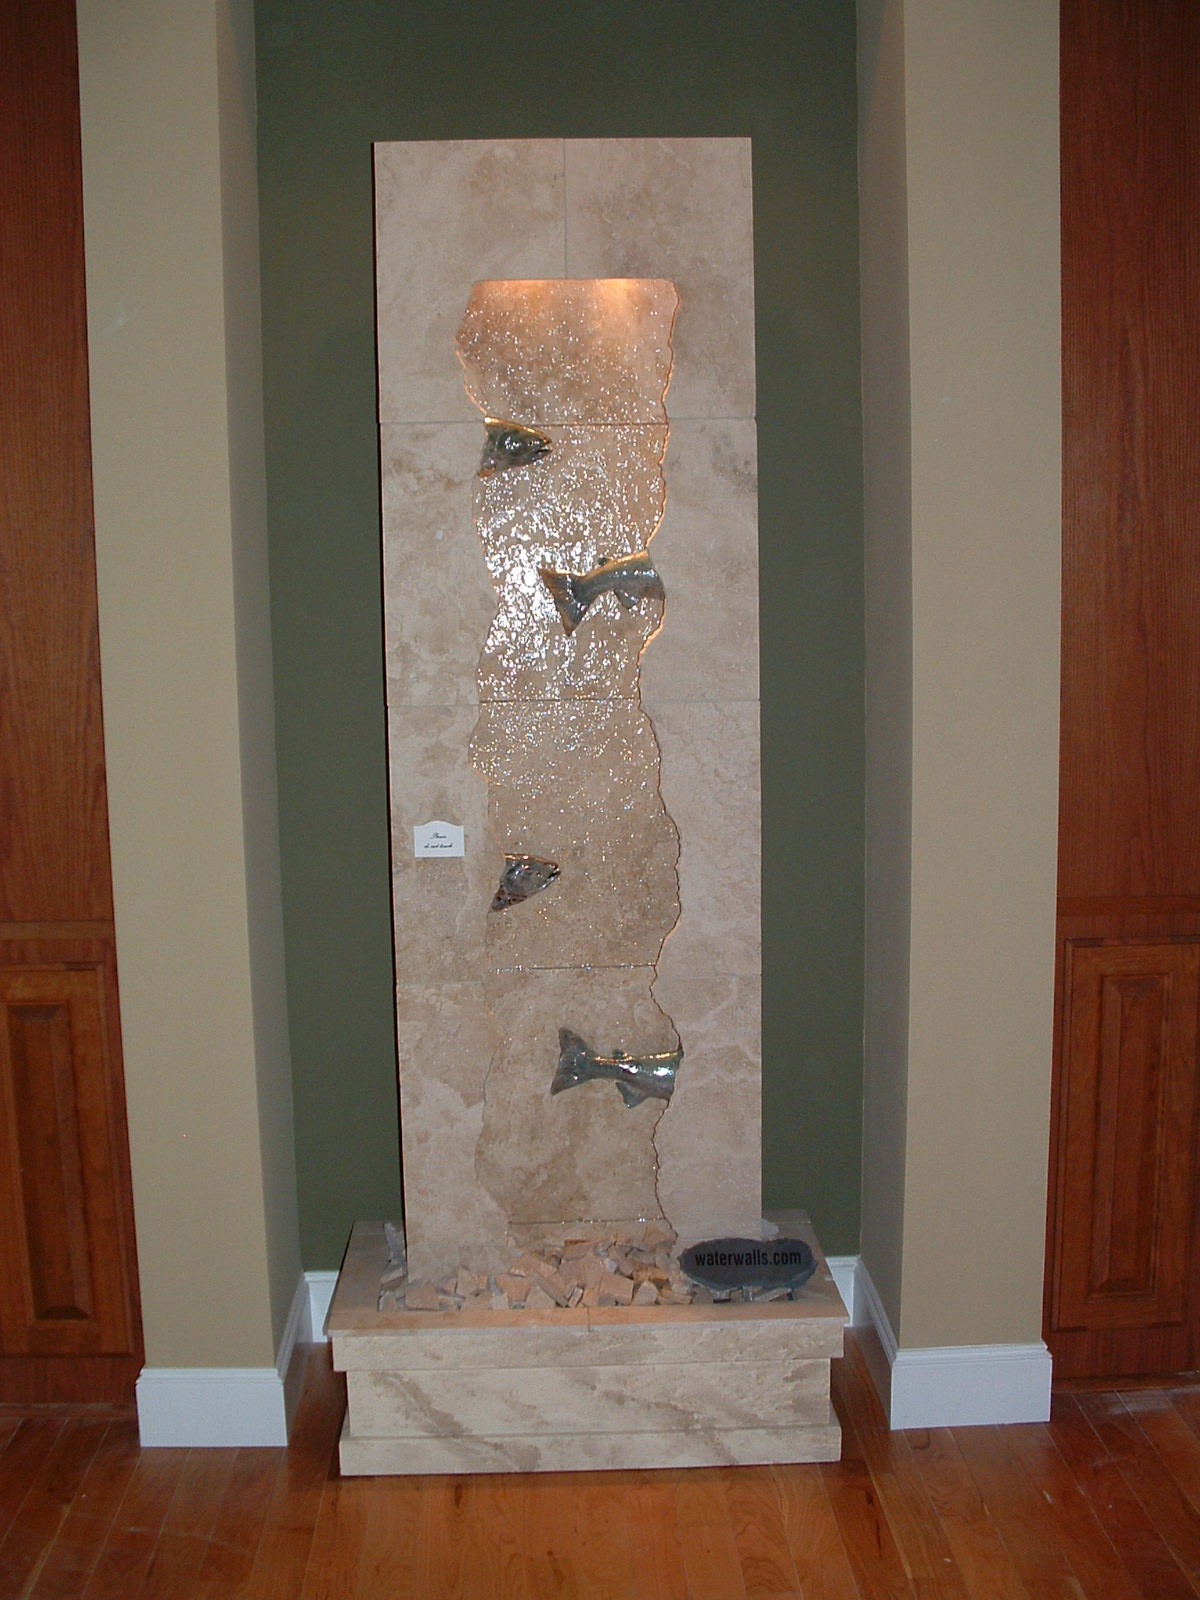 Kent, WA. Display for custom homebuilder, existing. 24 in. x 7 ft. tall, peek-a-boo salmon wall lighting in valance, basin topped out with travertine marble crumbles.